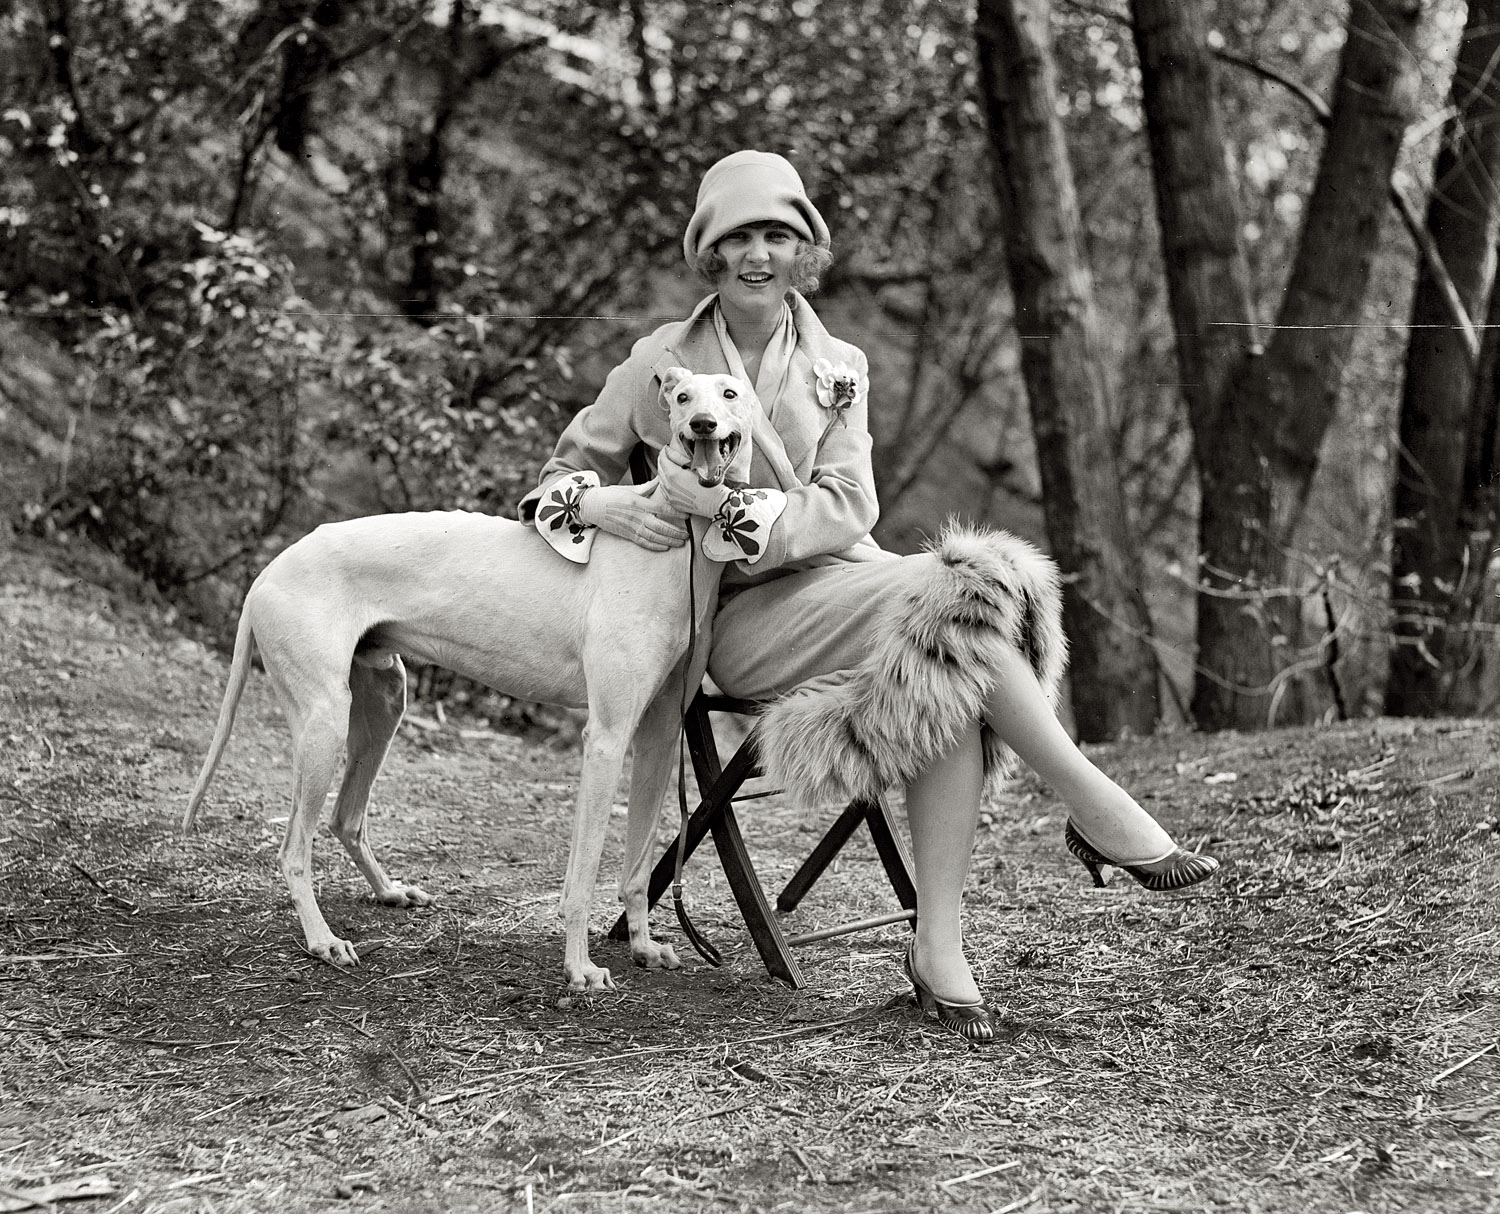 April 14, 1925. "Margaret Gorman with 'Long Goodie.' " Margaret, the Girl With the Crocodile Car, was the first-ever Miss America. National Photo Company Collection glass negative, Library of Congress. View full size.